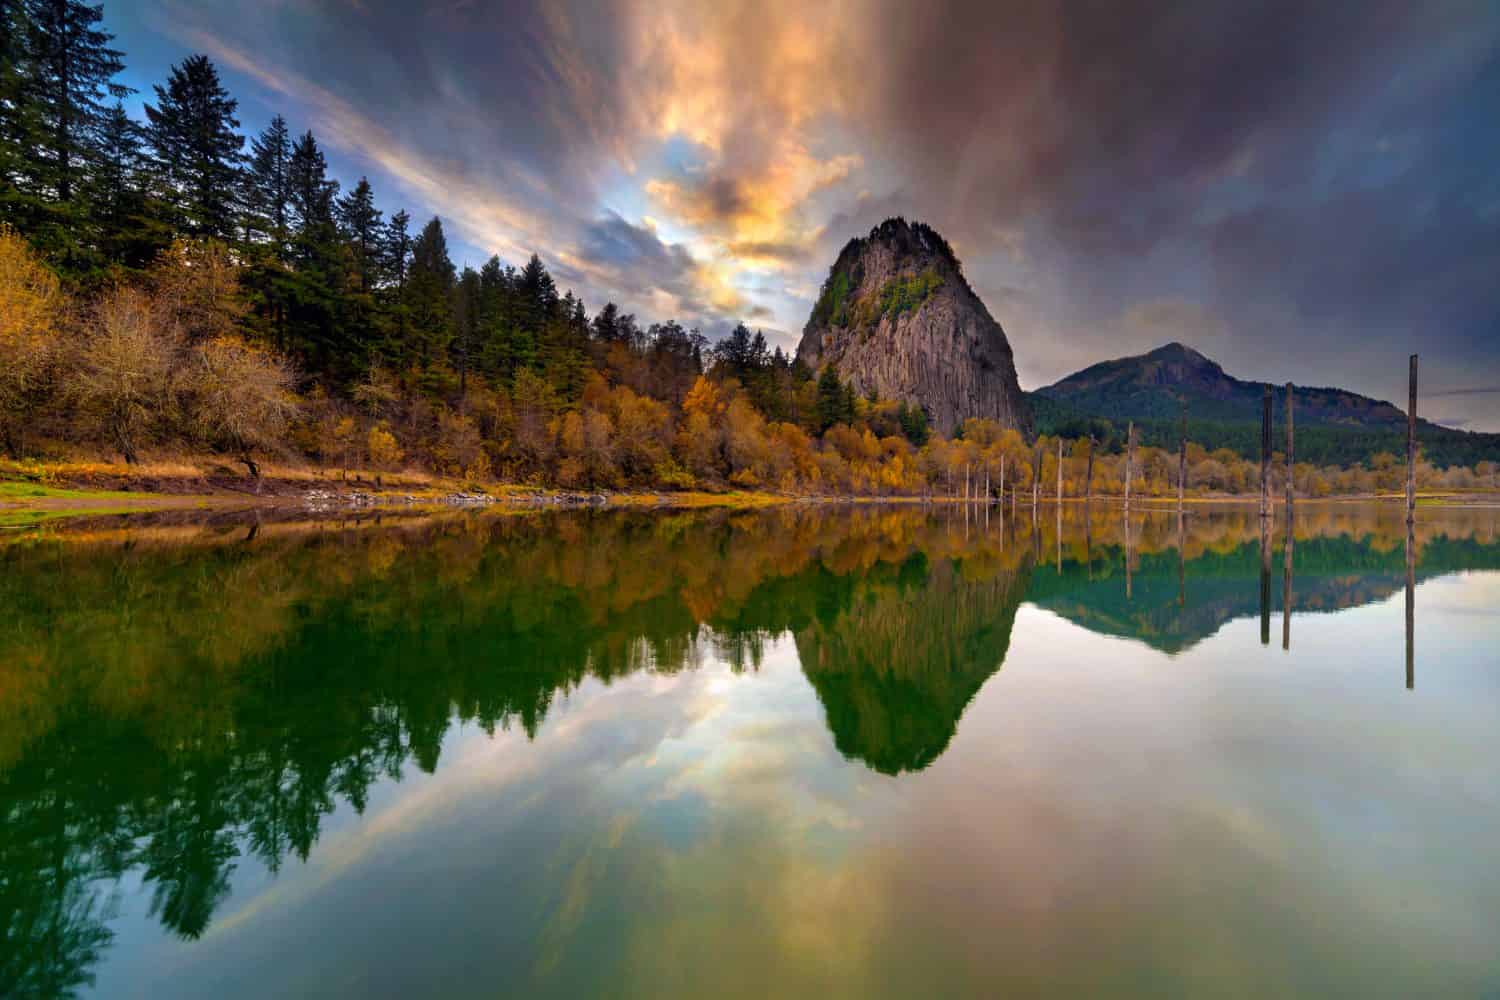 Beacon Rock from Boat Dock Moorage along Columbia River Gorge during Sunset in Washington State